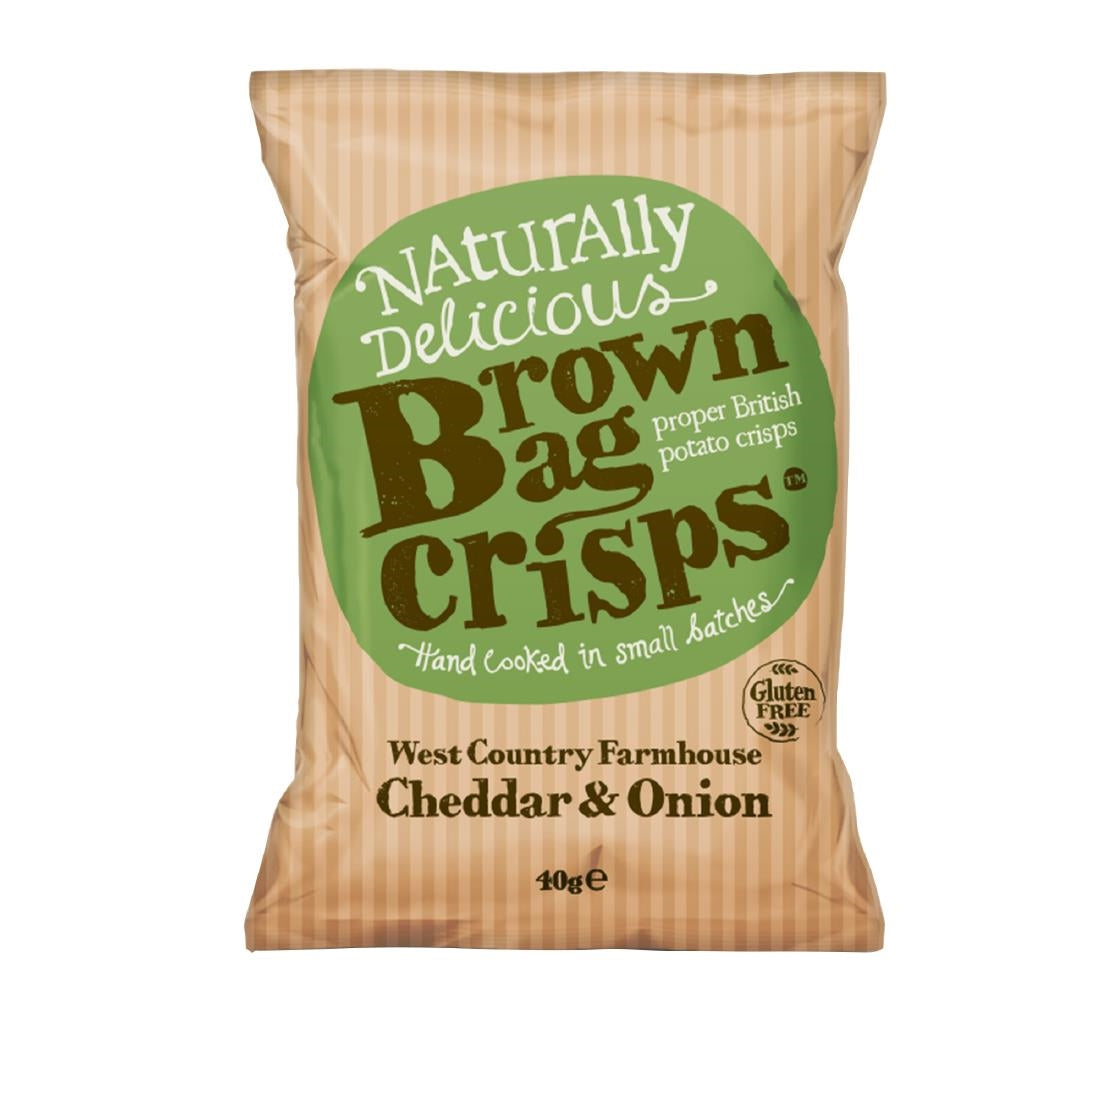 FU432 Brown Bag Crisps Cheddar and Onion 40g (Pack of 20)